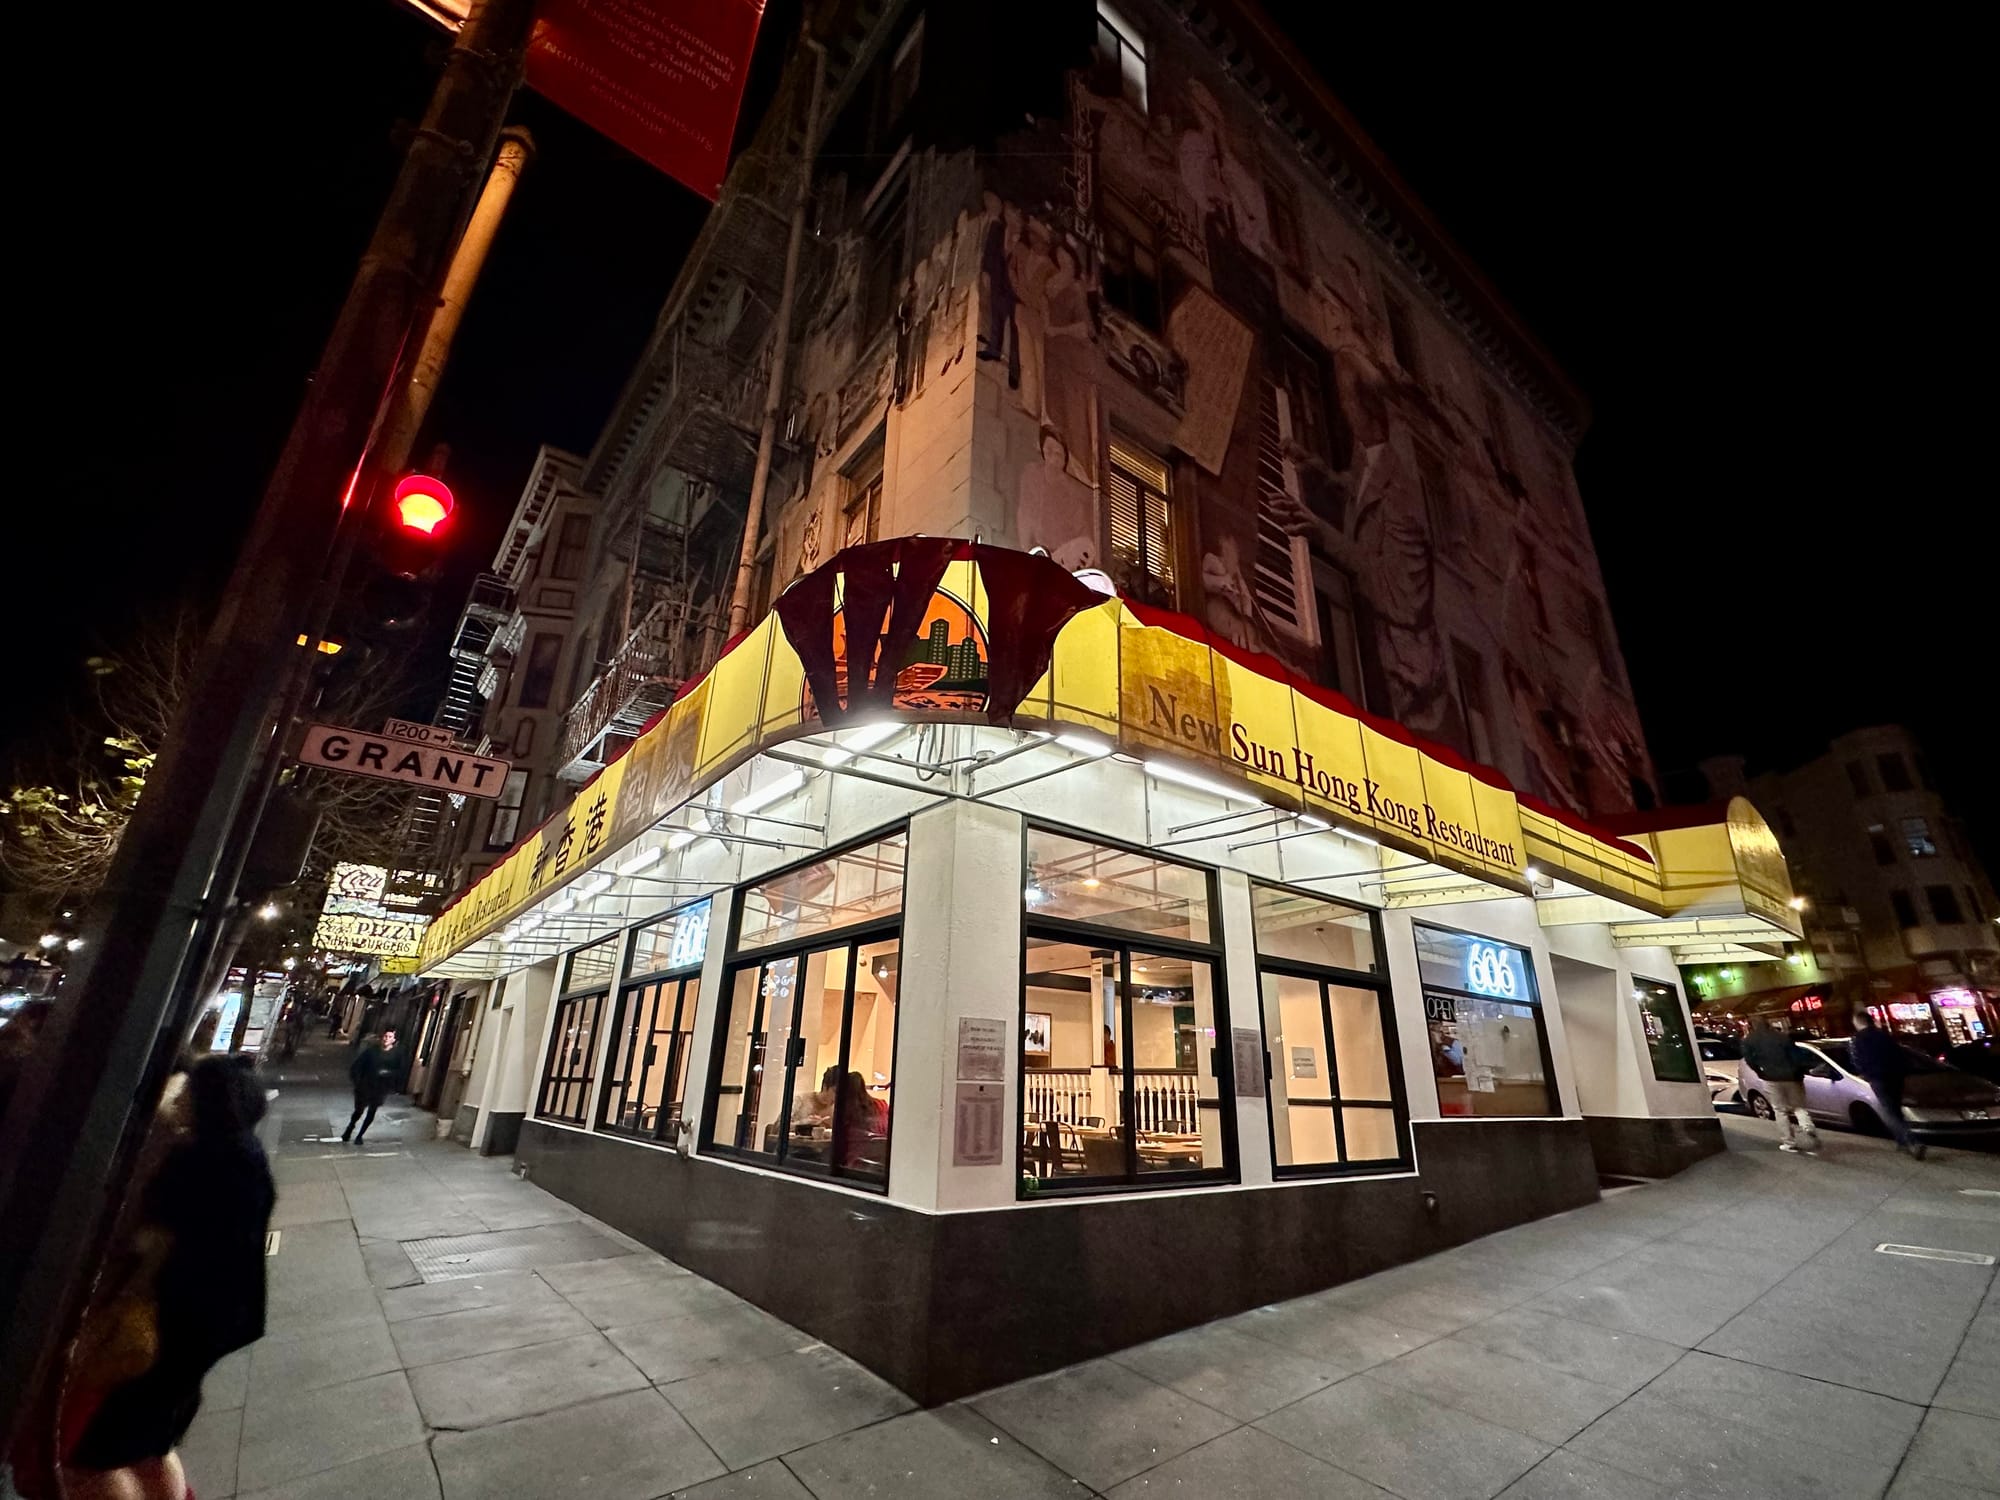 The exterior of 606 in Chinatown. Photo: © tablehopper.com.